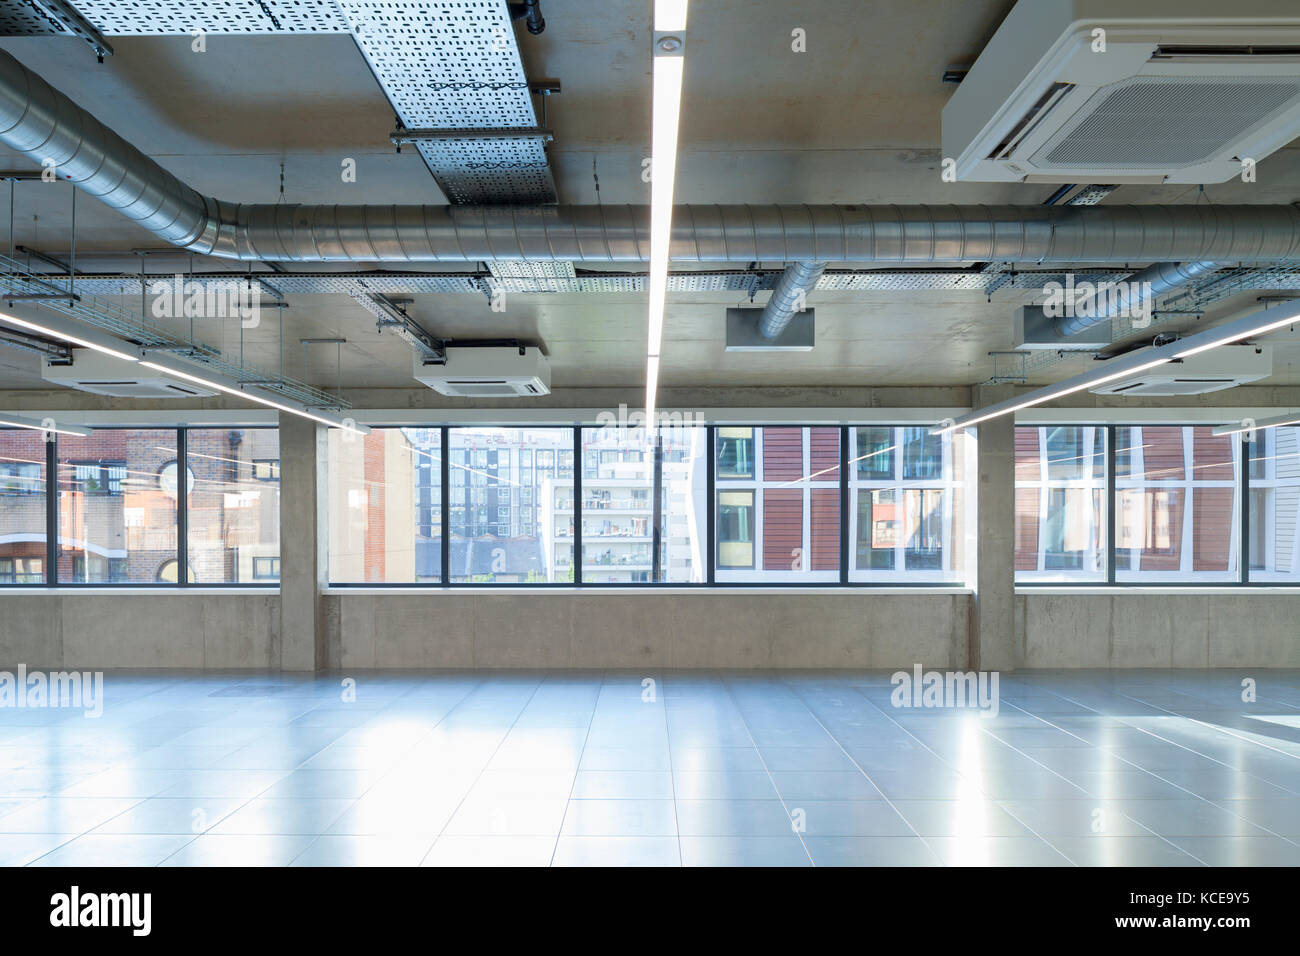 Empty commercial office space with visible services and air conditioning on the ceiling. Stock Photo